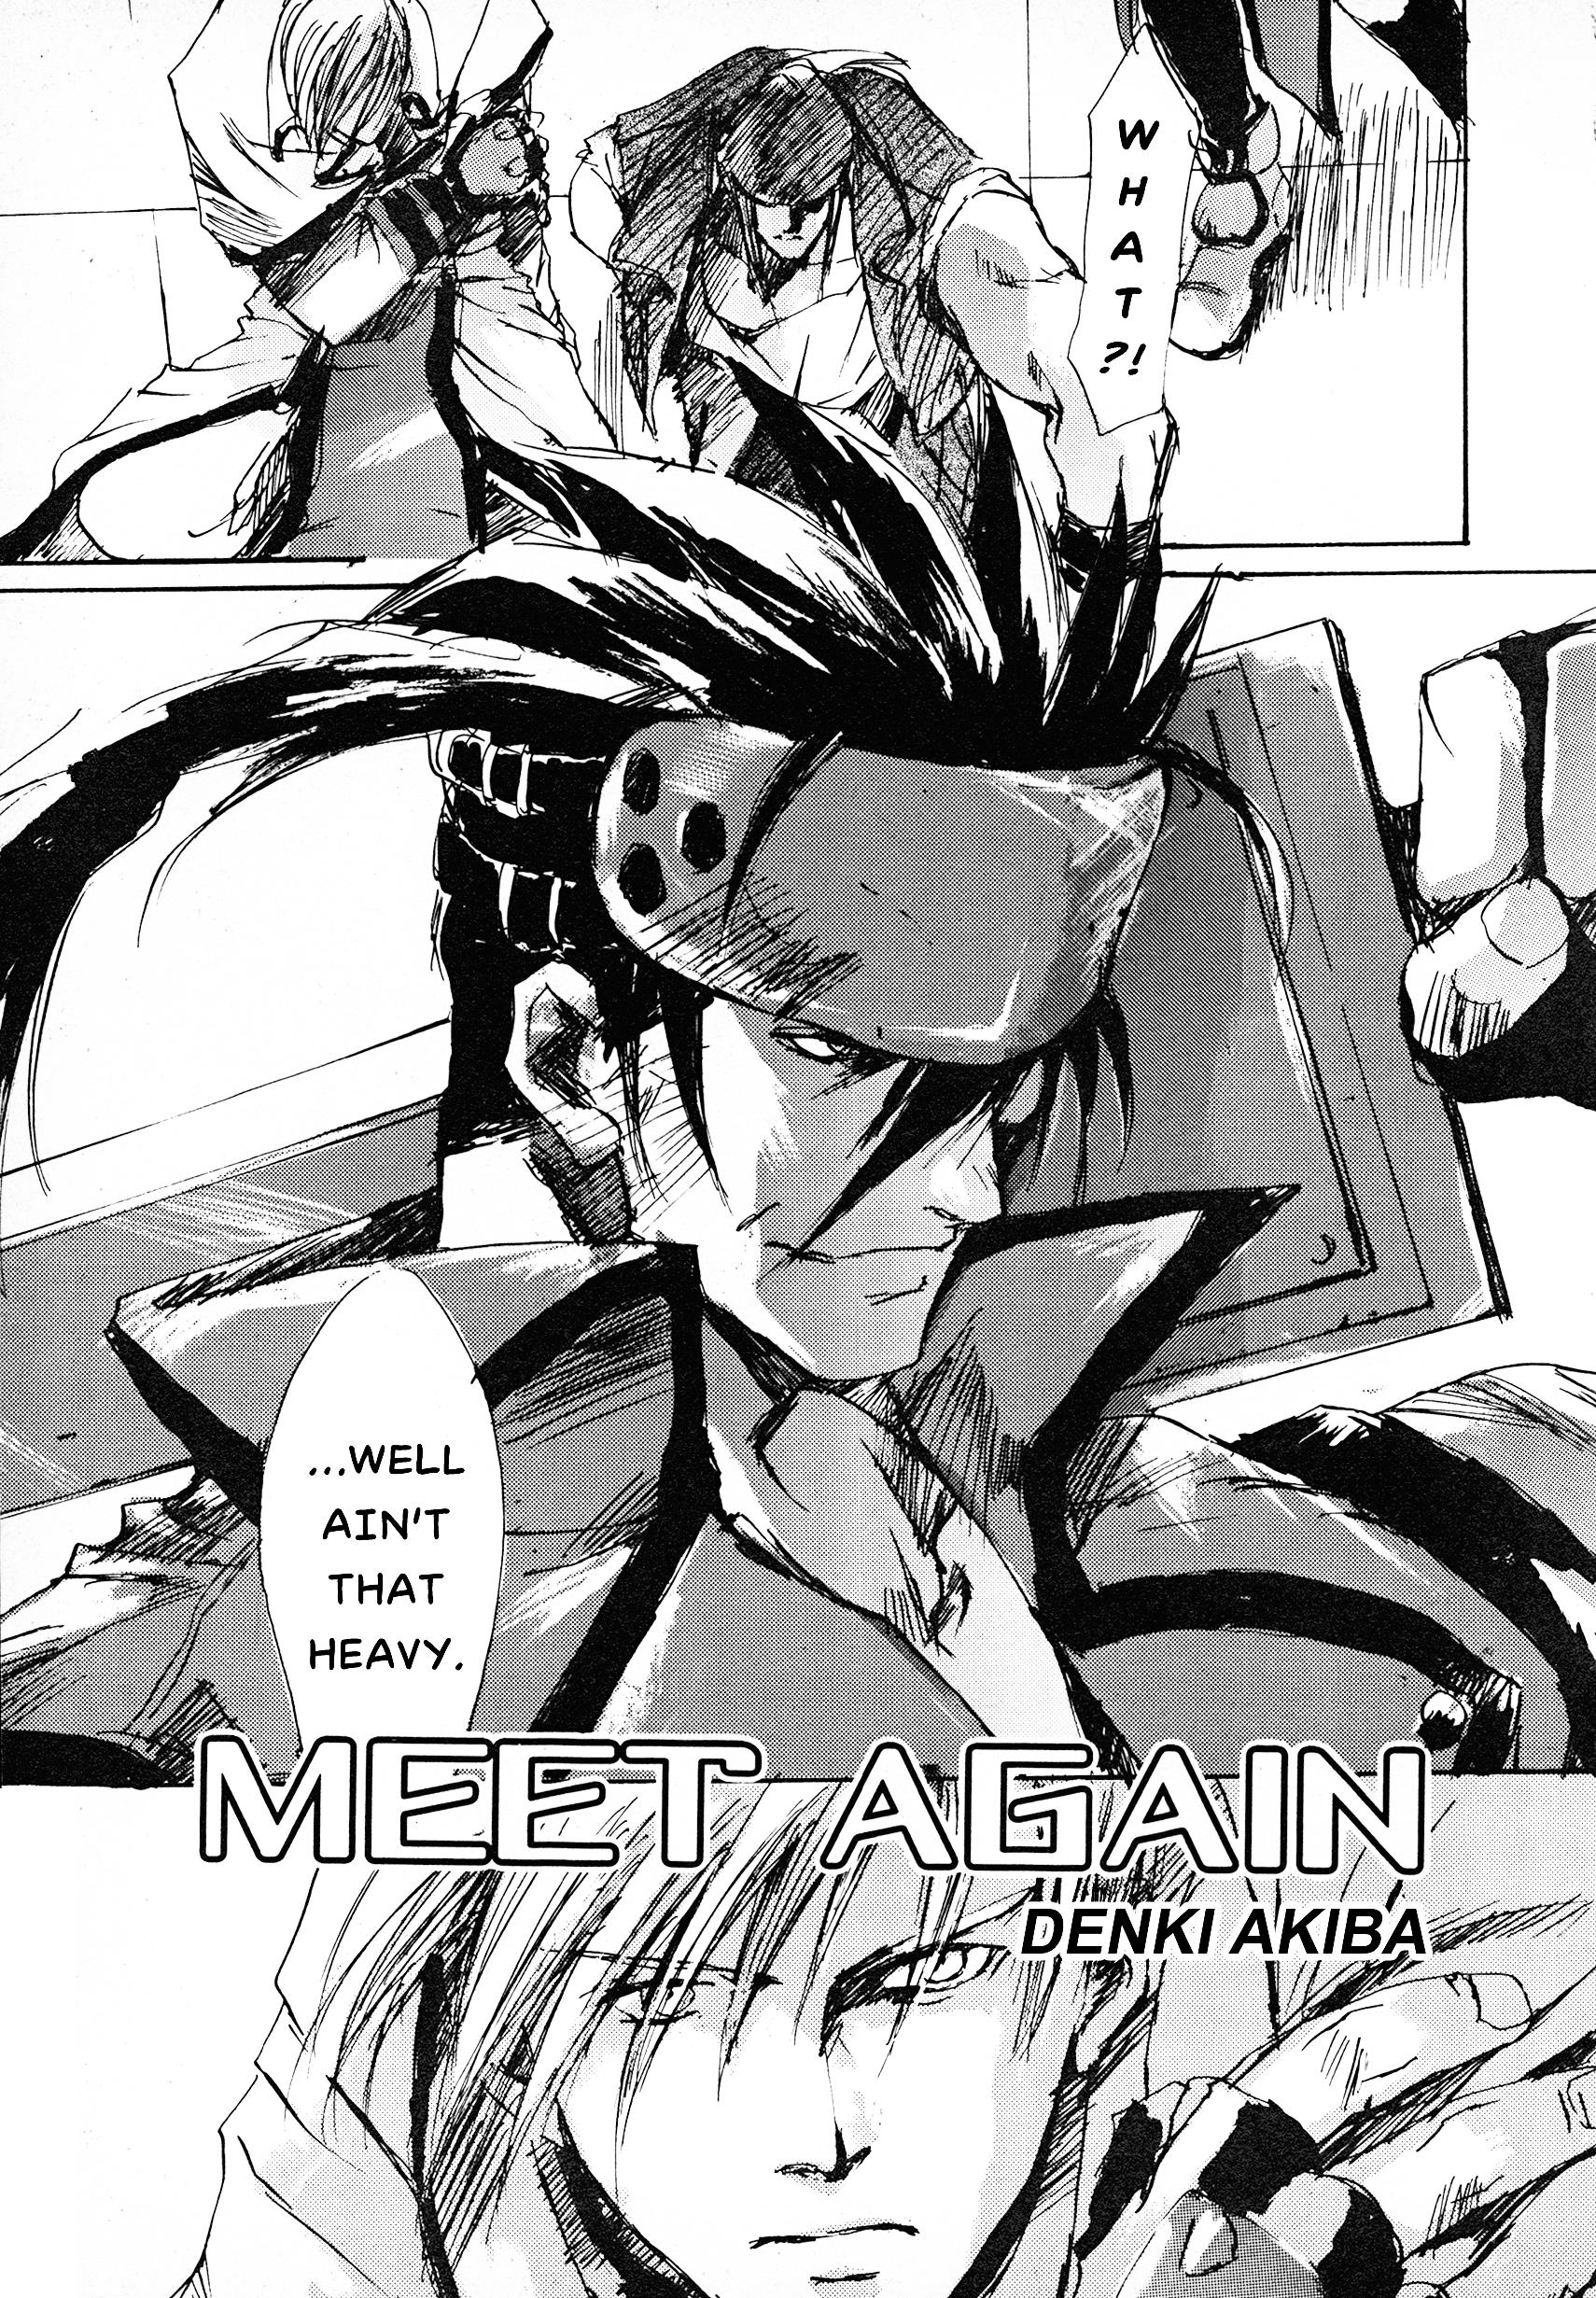 Guilty Gear Comic Anthology Vol.1 Chapter 15: Meet Again - Picture 3